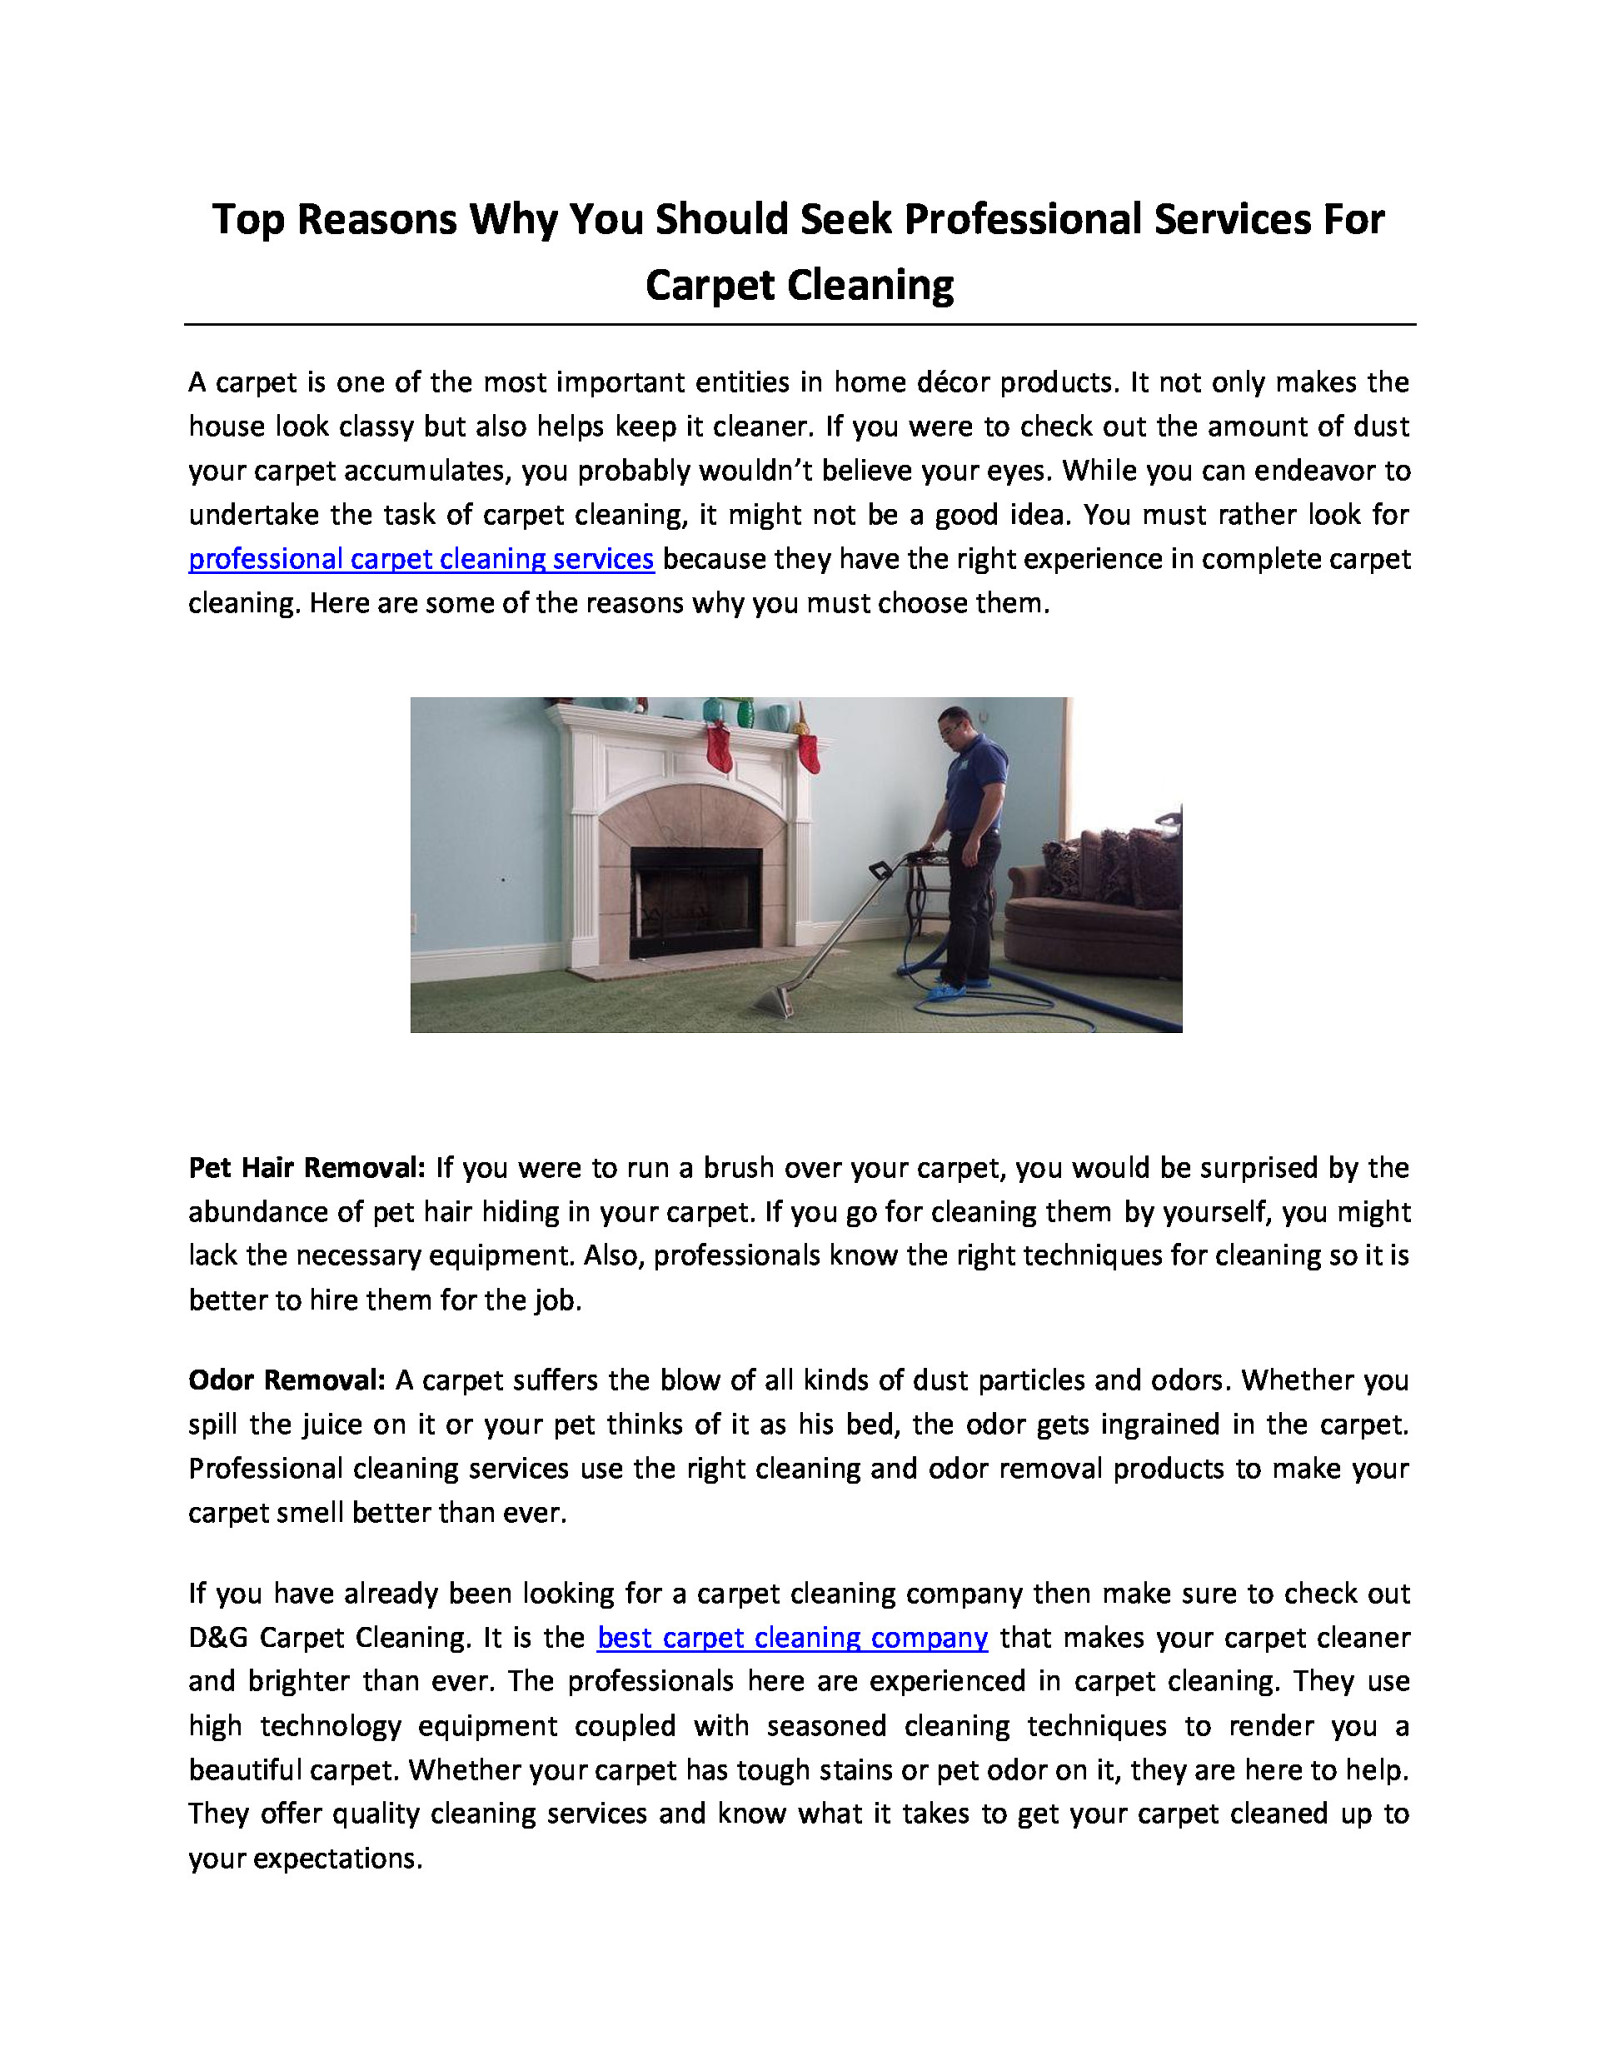 Top Reasons Why You Should Seek Professional Services For Carpet Cleaning